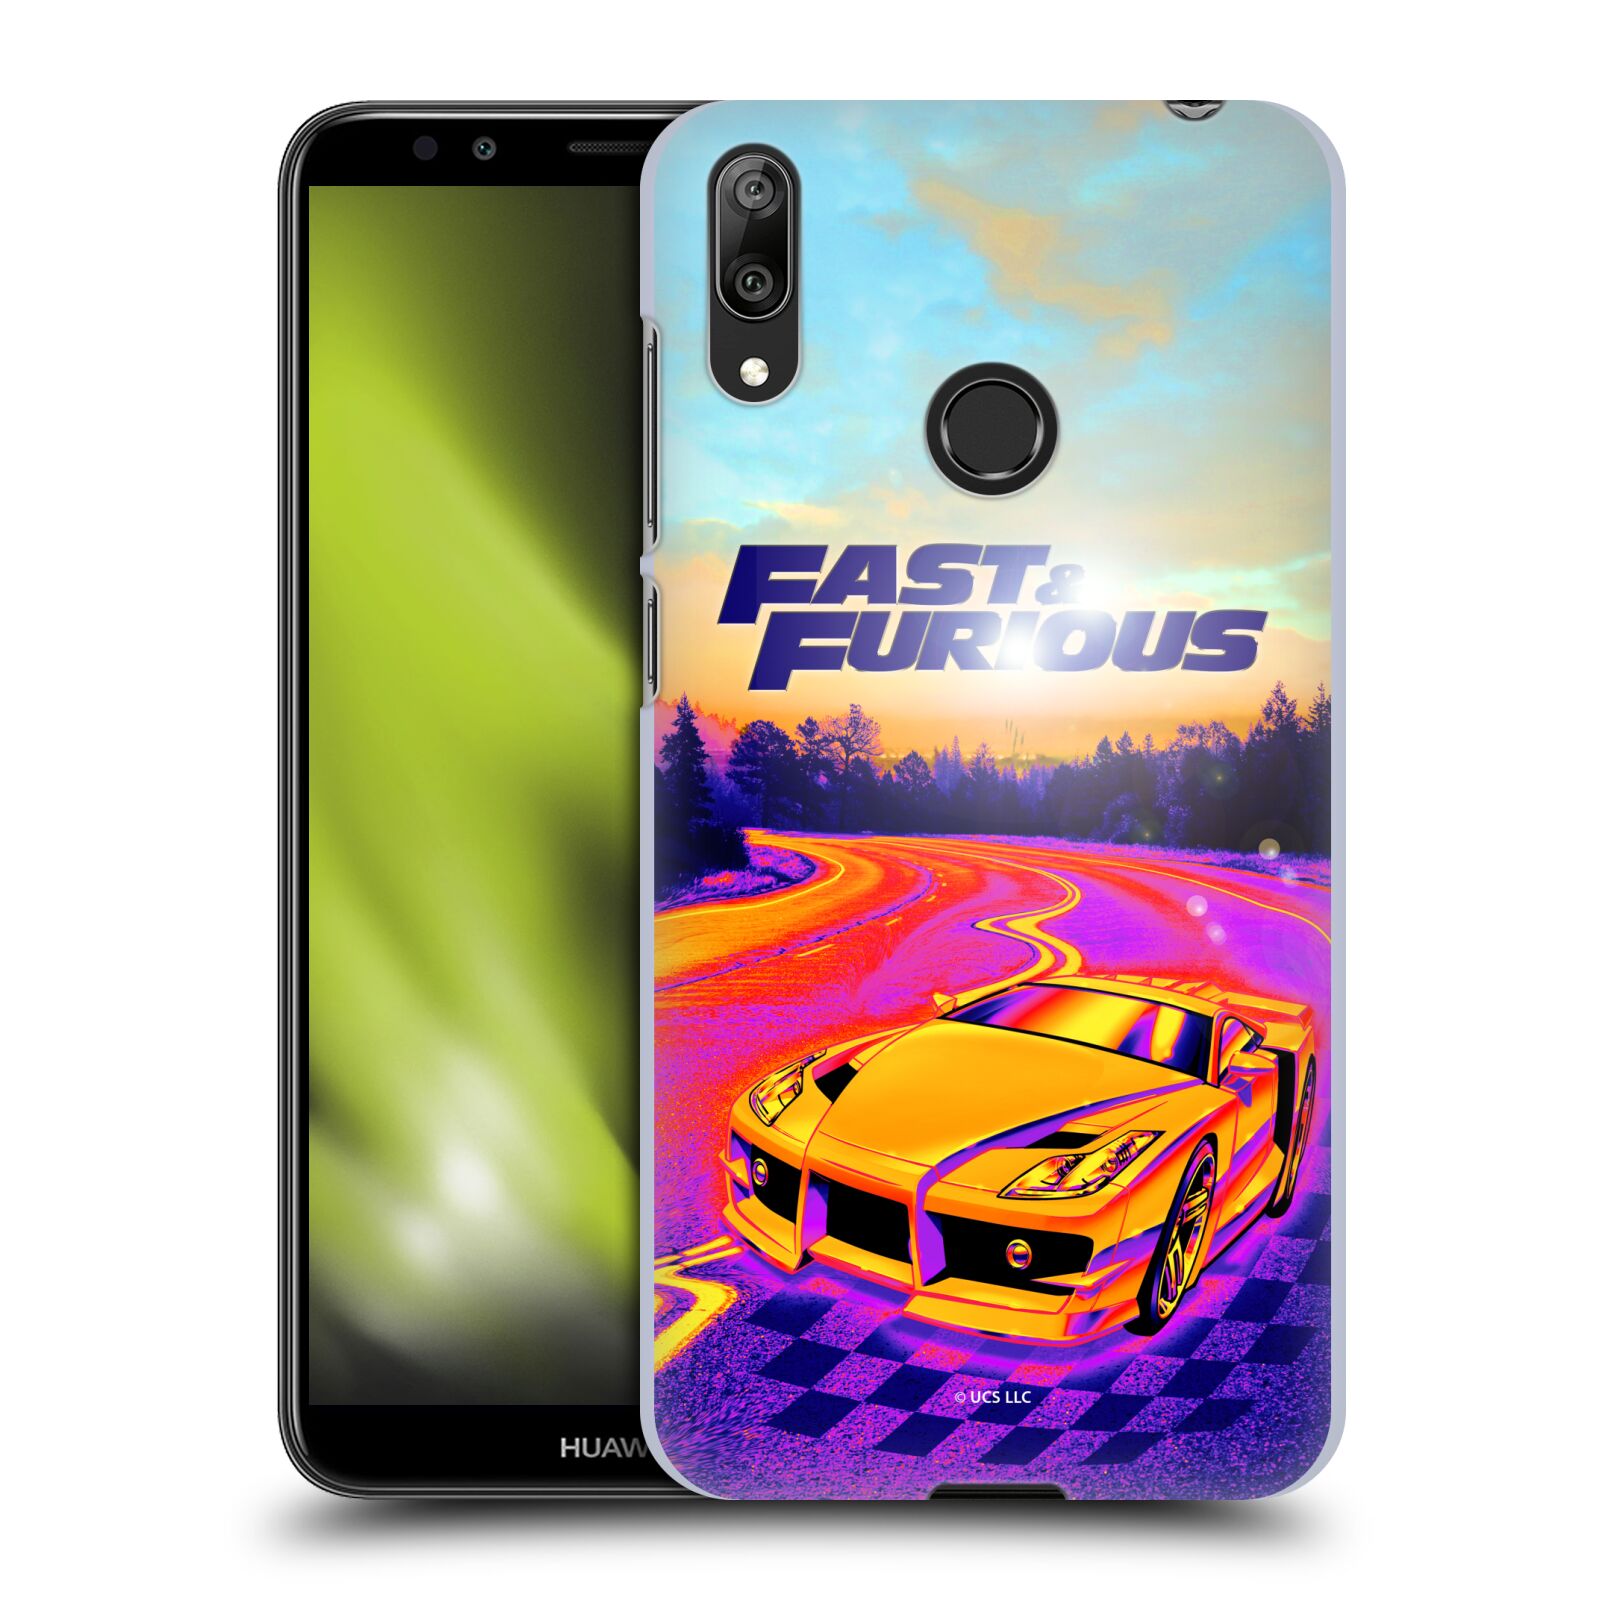 Obal na mobil Huawei Y7 2019 - HEAD CASE - Rychle a Zběsile - Barevné auto